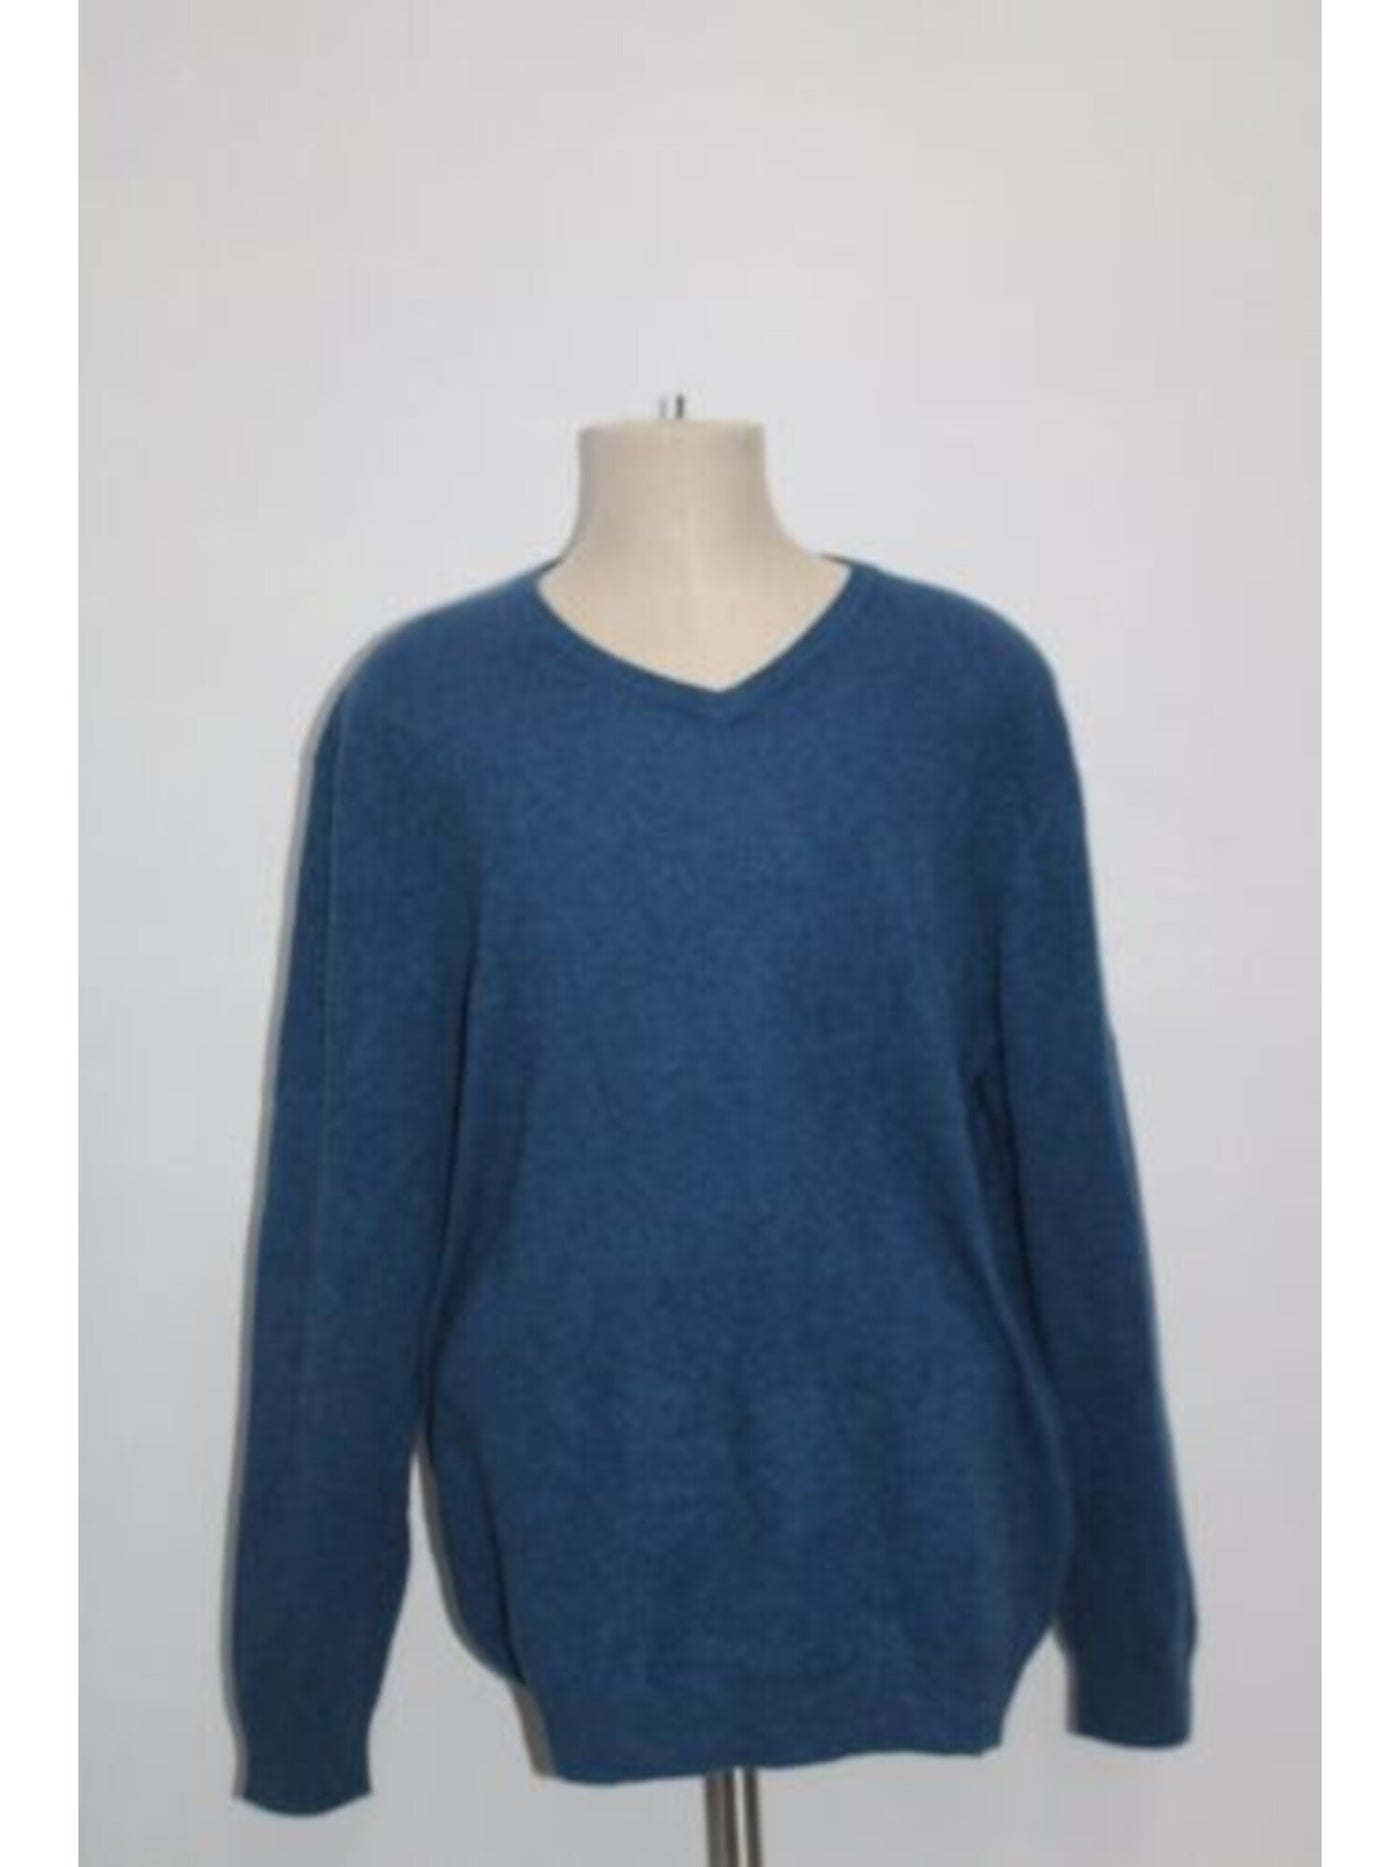 CLUBROOM Mens Luxury Blue Heather V Neck Stretch Pullover Sweater S